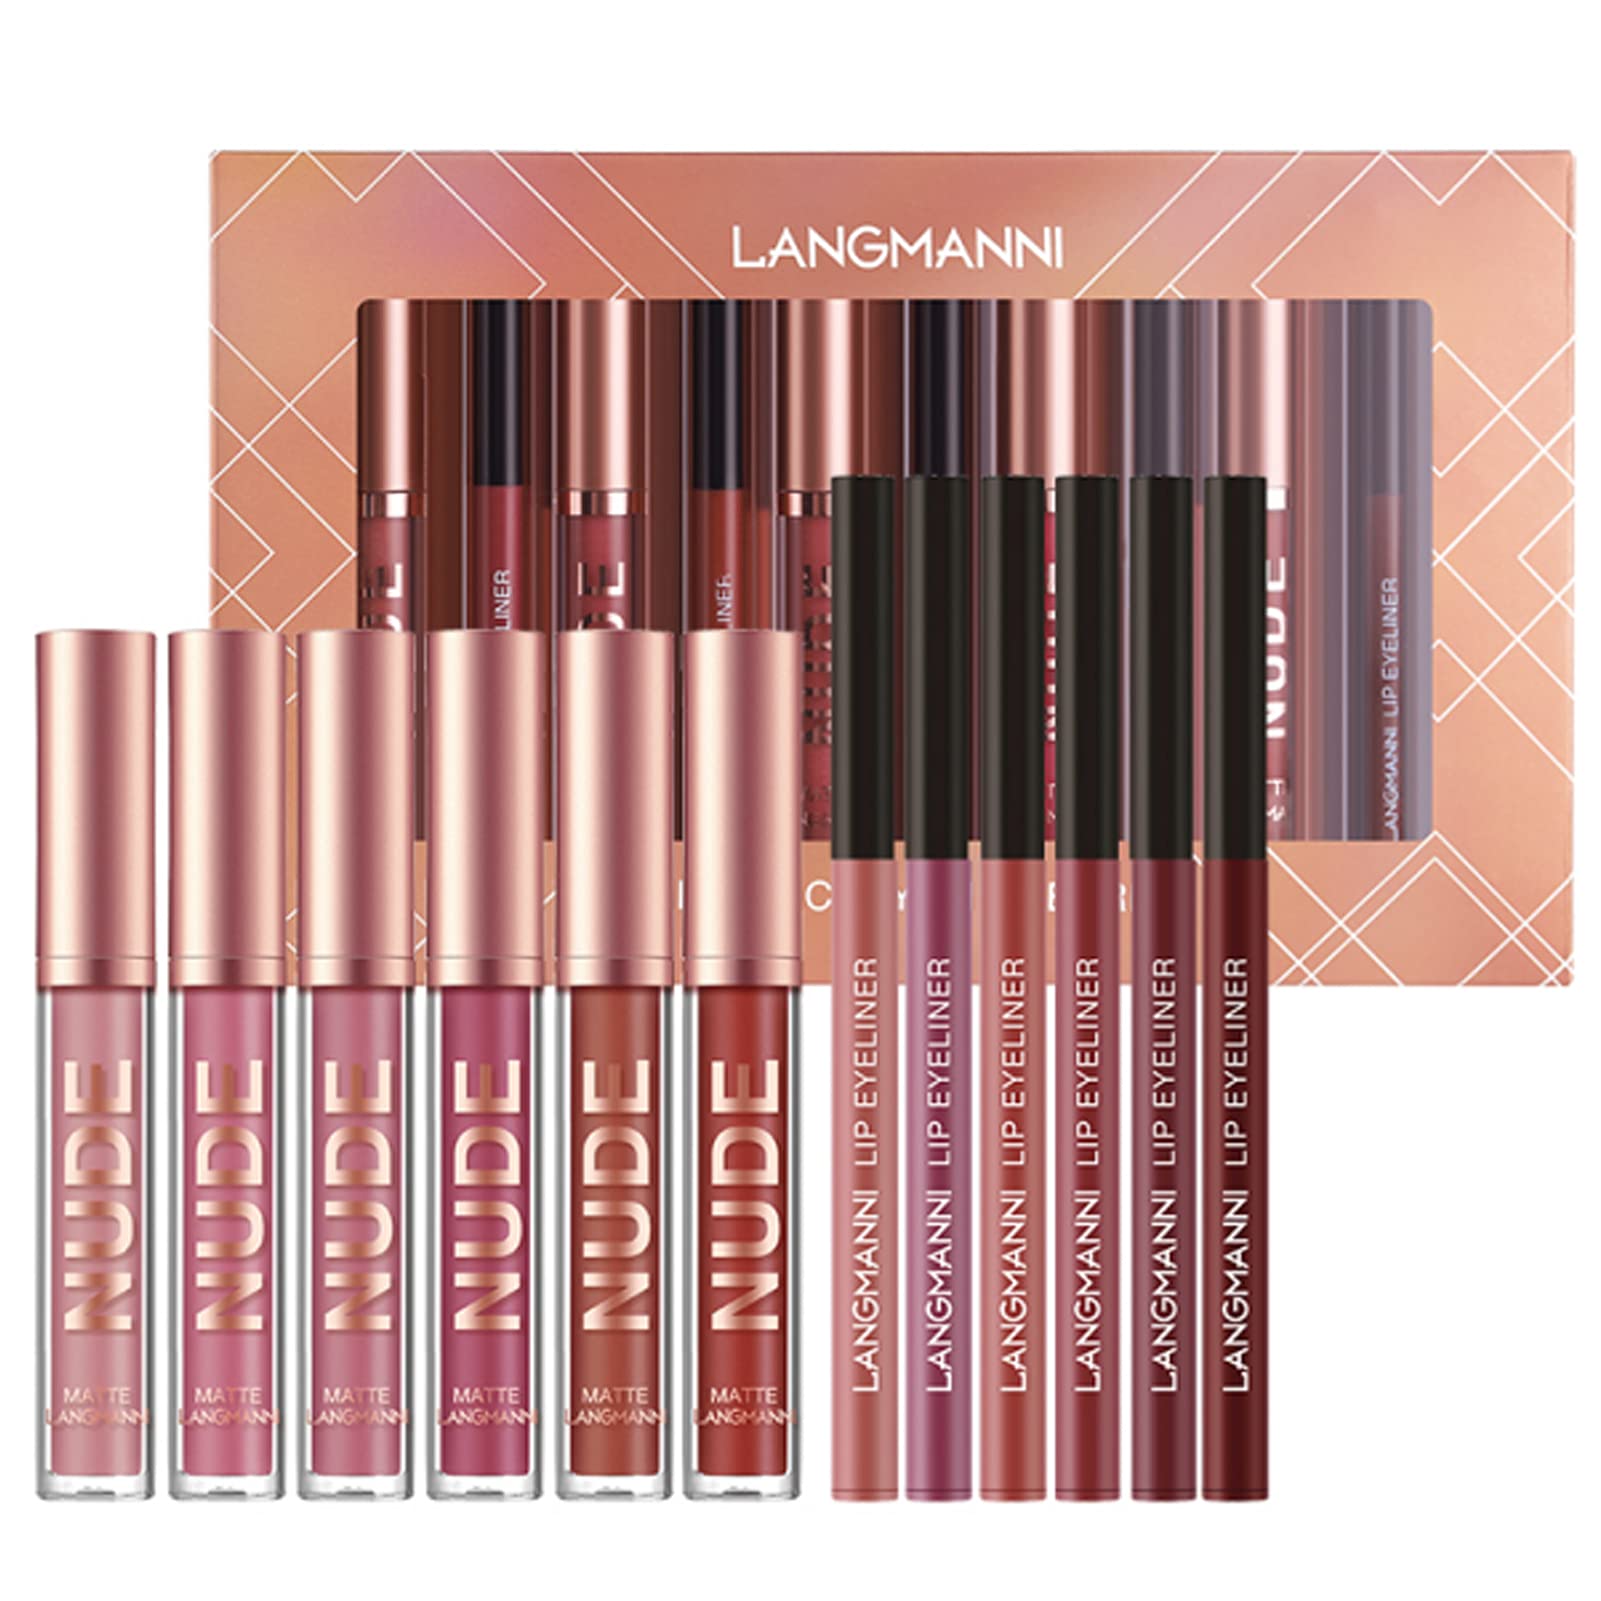 Petansy 12Pcs Lip Liner and Lipstick Set, 6 Colors Matte Liquid Lip Sticks + 6 Matching Smooth Nude Lip Liner, All in One Waterproof Long Lasting Lip Gloss Lips Make-up Gift Set for Girls and Women(A)